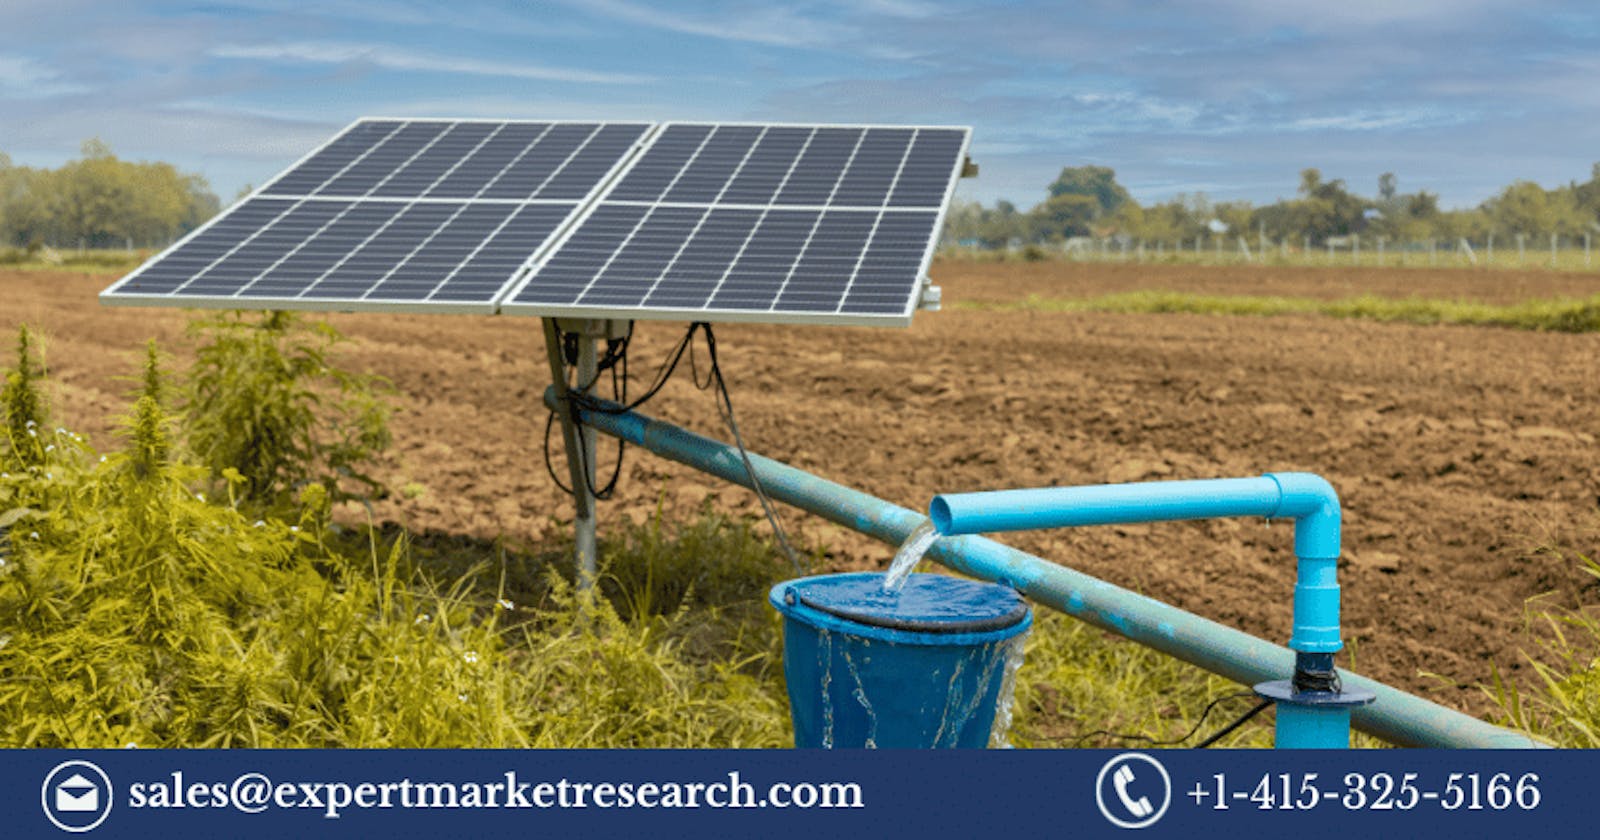 Empowering Sustainability: The Growing Solar Water Pumps Market